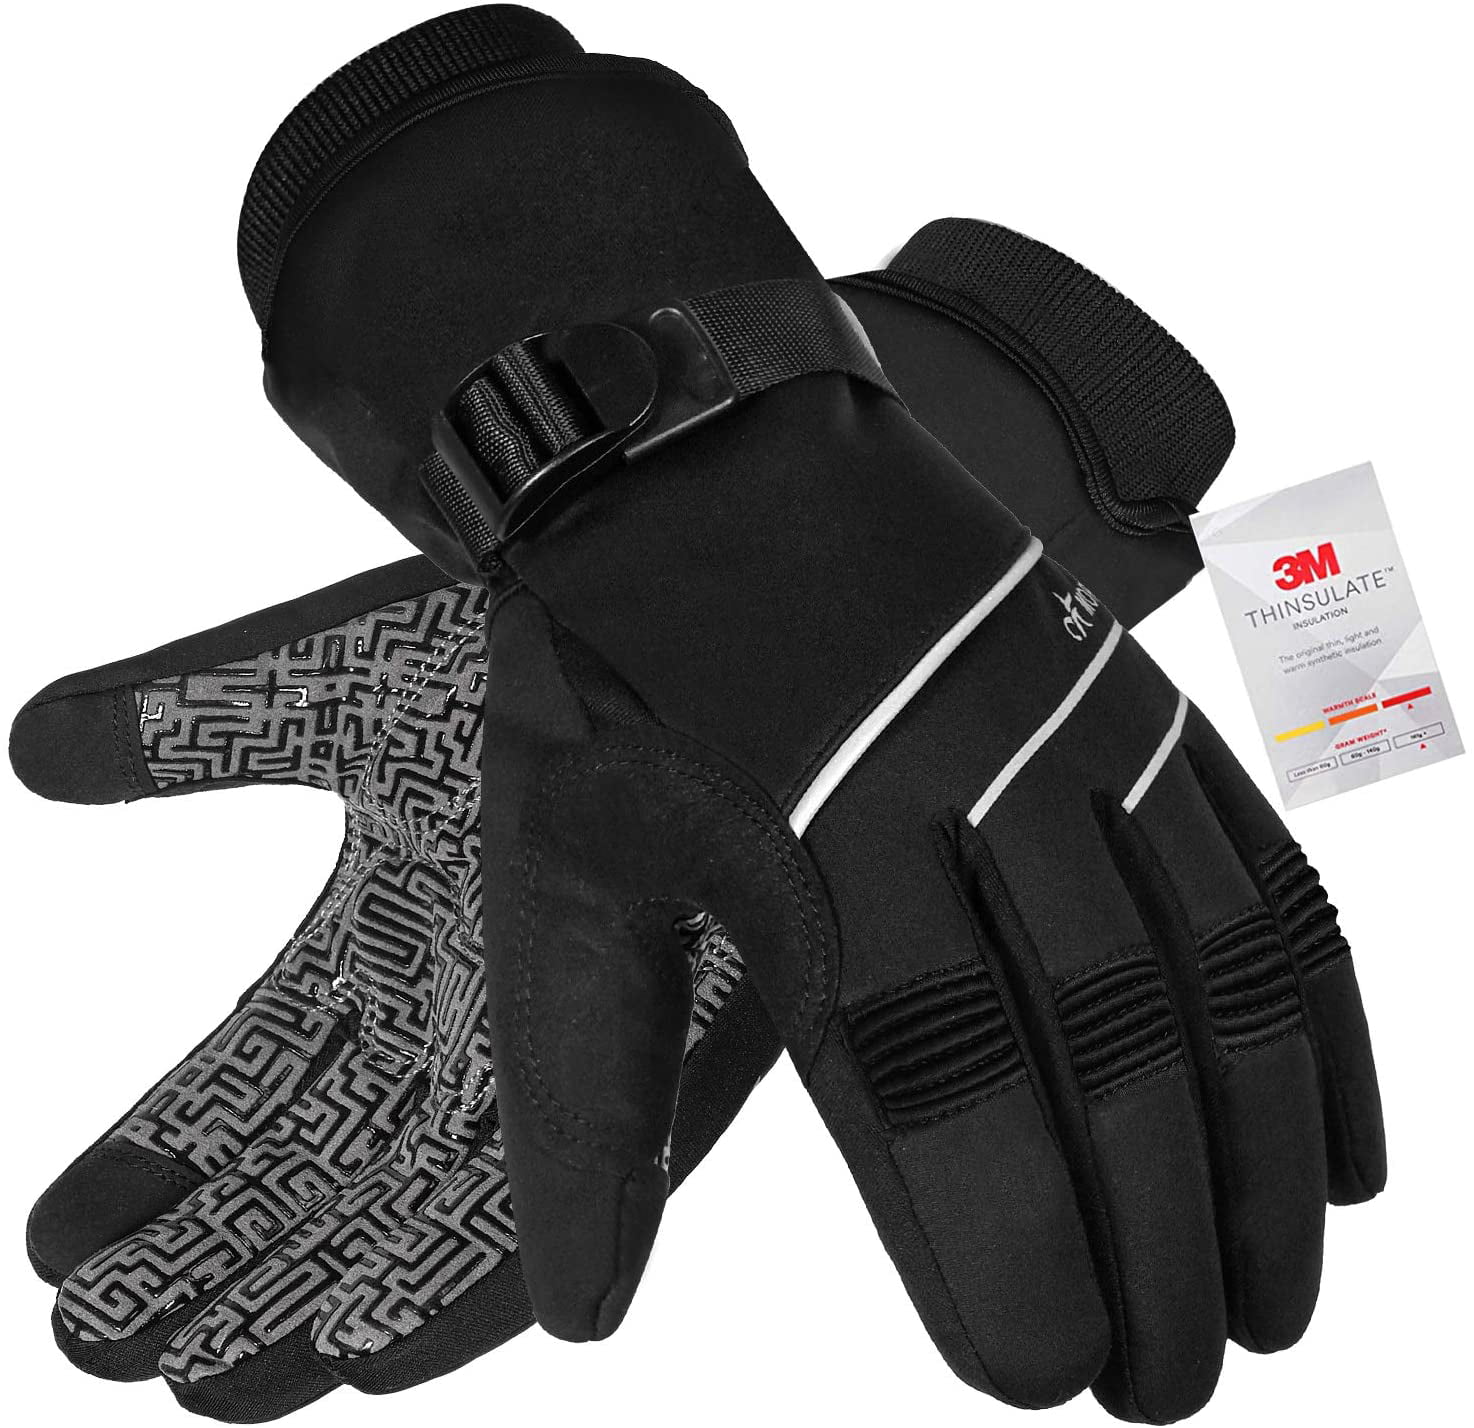 Mens Winter Gloves Ladies Motorcycle Thermal Running Sports Warm 3M Touchscreen 